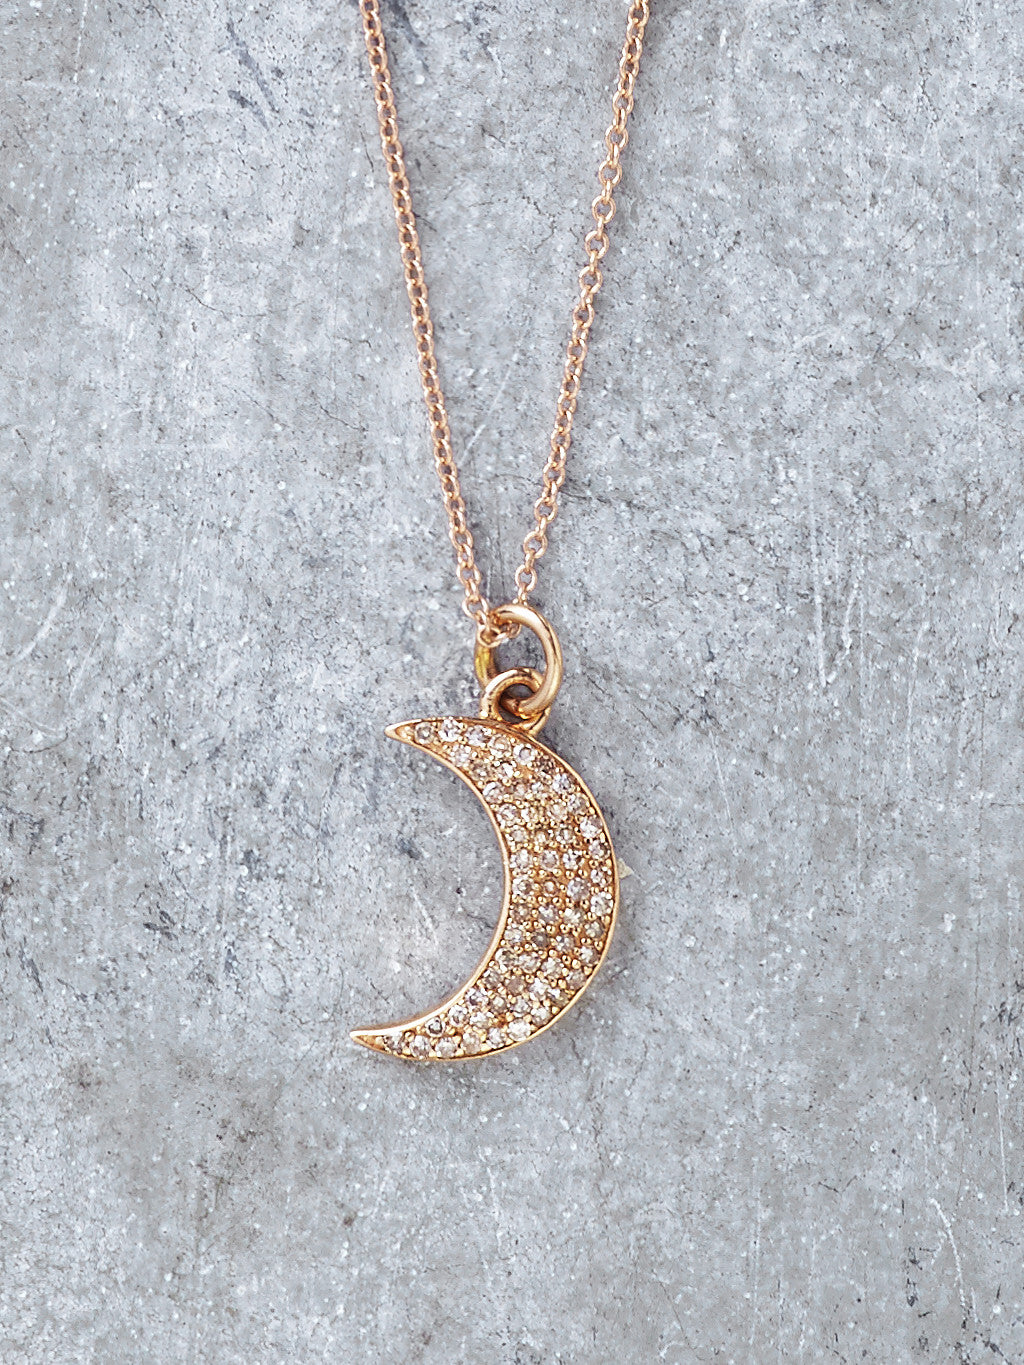 Buy 14k Solid Gold Moon Necklace, Crescent Moon Necklace, Dainty Moon Star  Charm Pendant, Celestial Necklace,birthday Gift, Christmas Gift Online in  India - Etsy